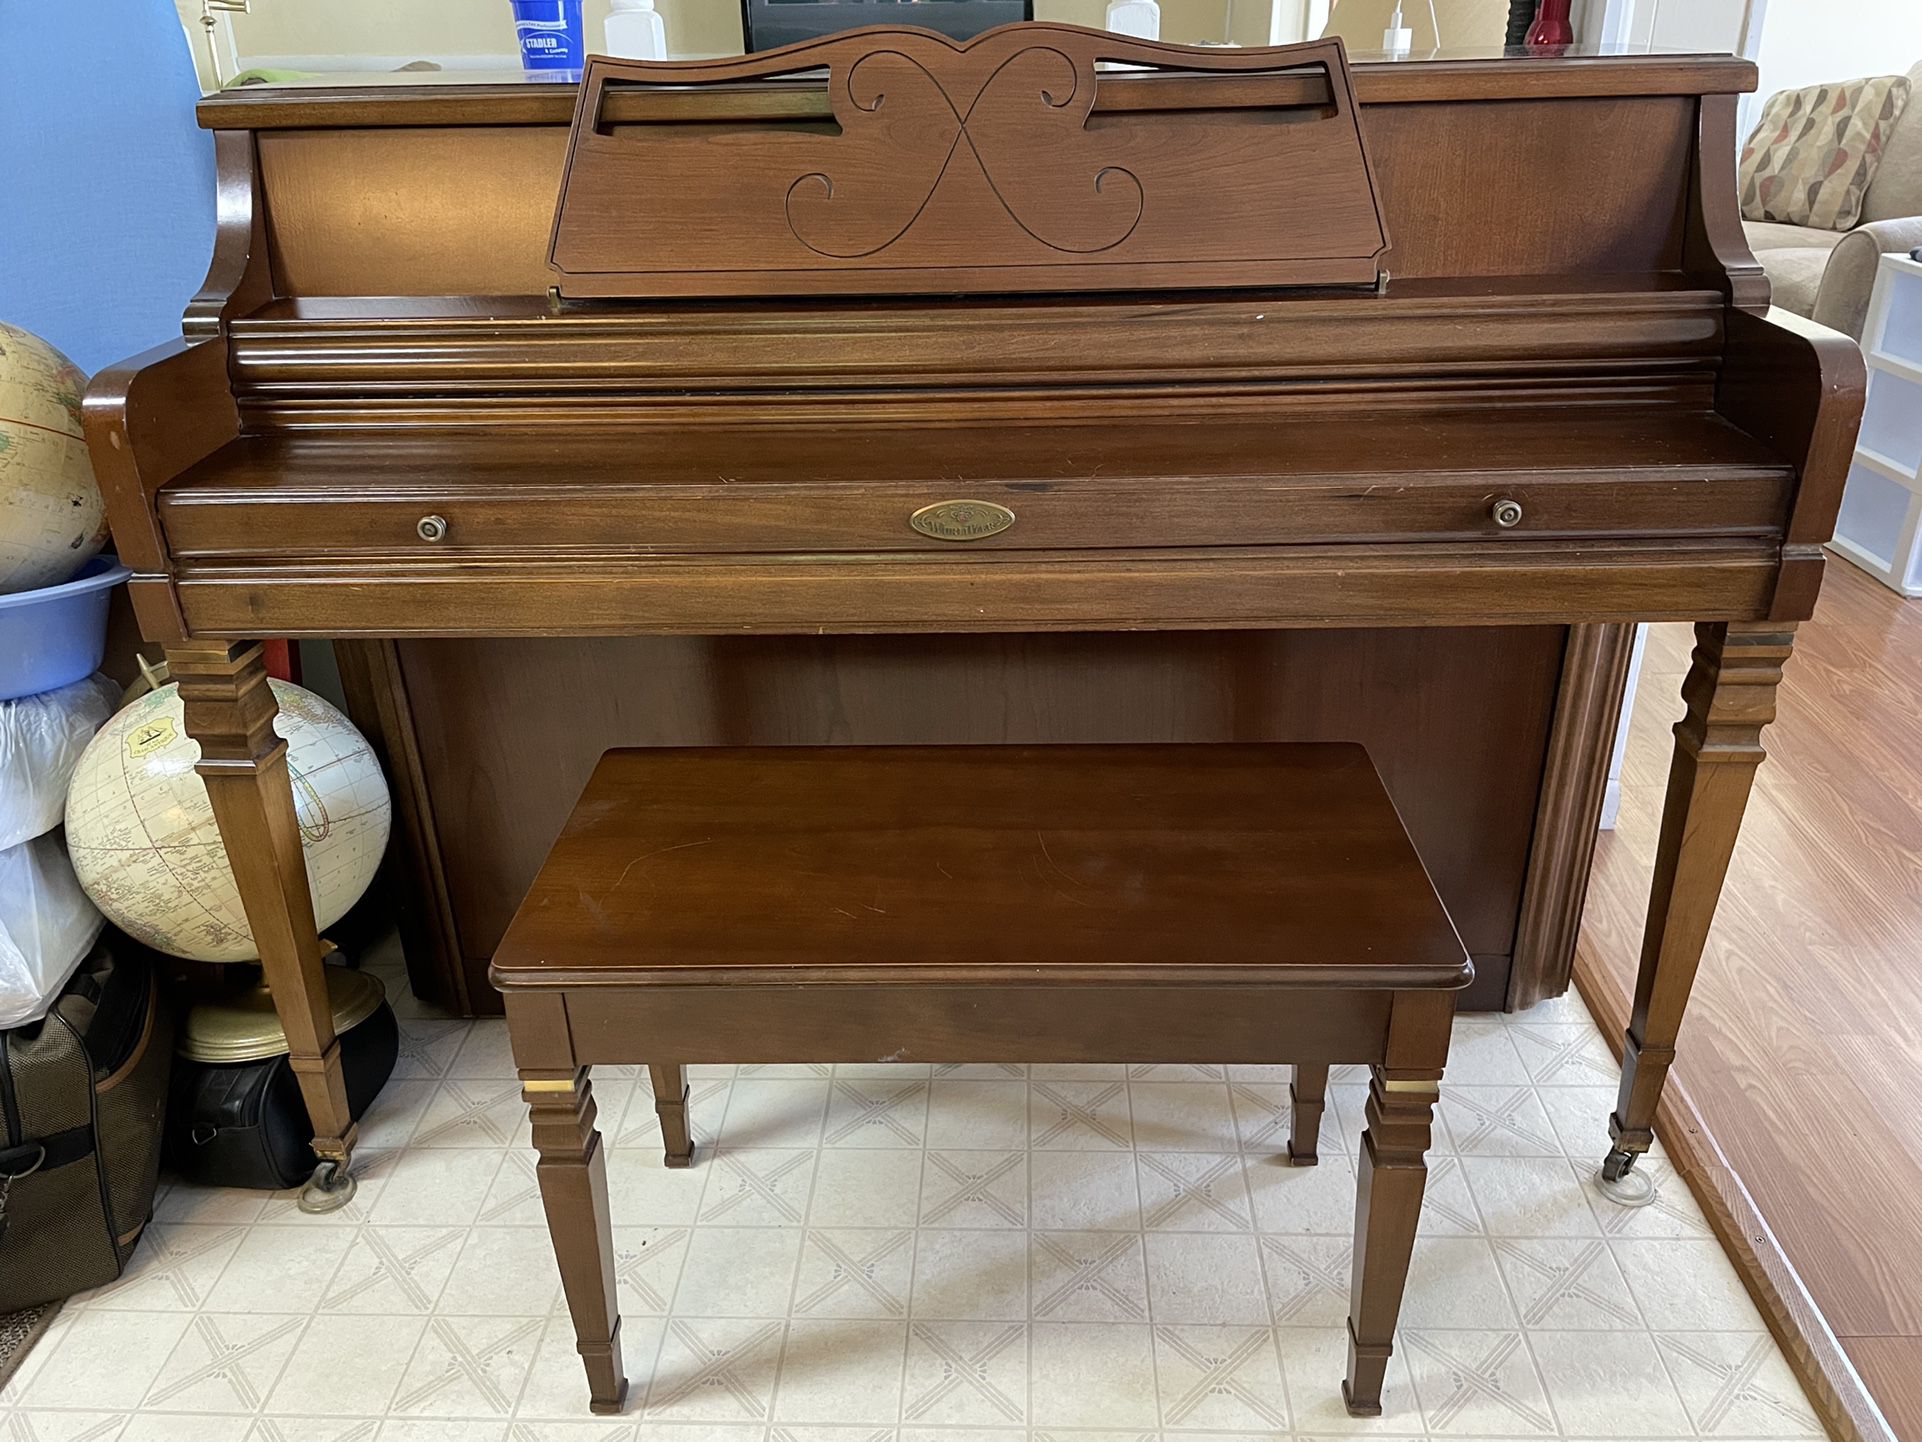 FREE - Wurlitzer  Upright Piano - Moving Can’t Take It With Us